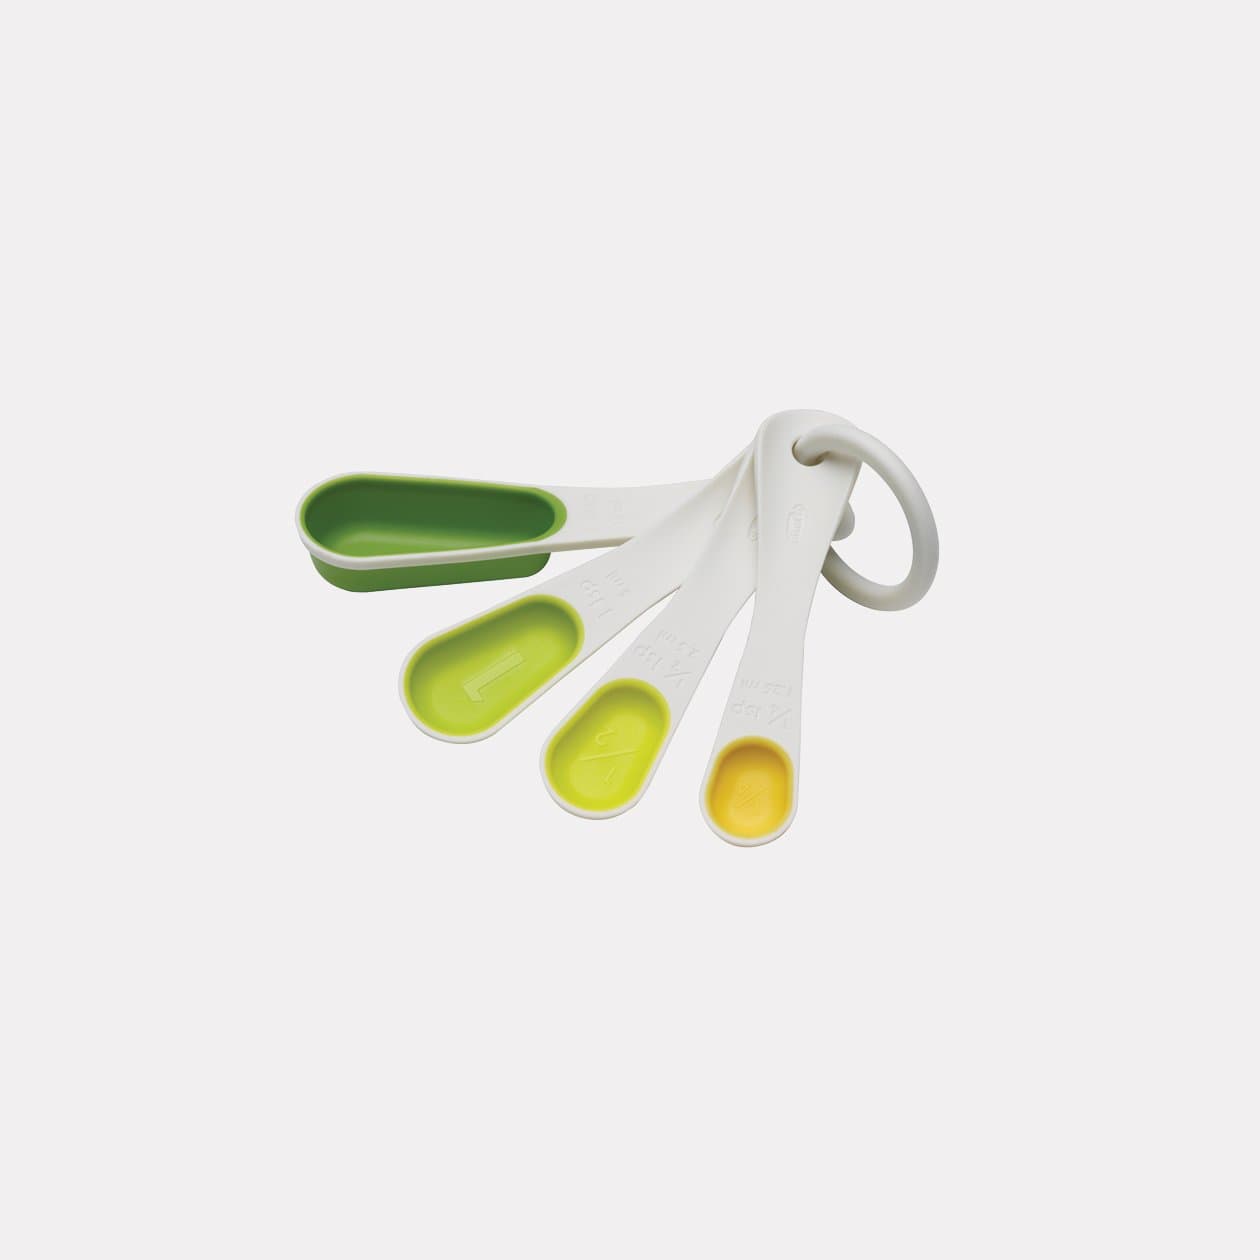 ST Plastic Measuring Spoon, Size: Standare, for Home